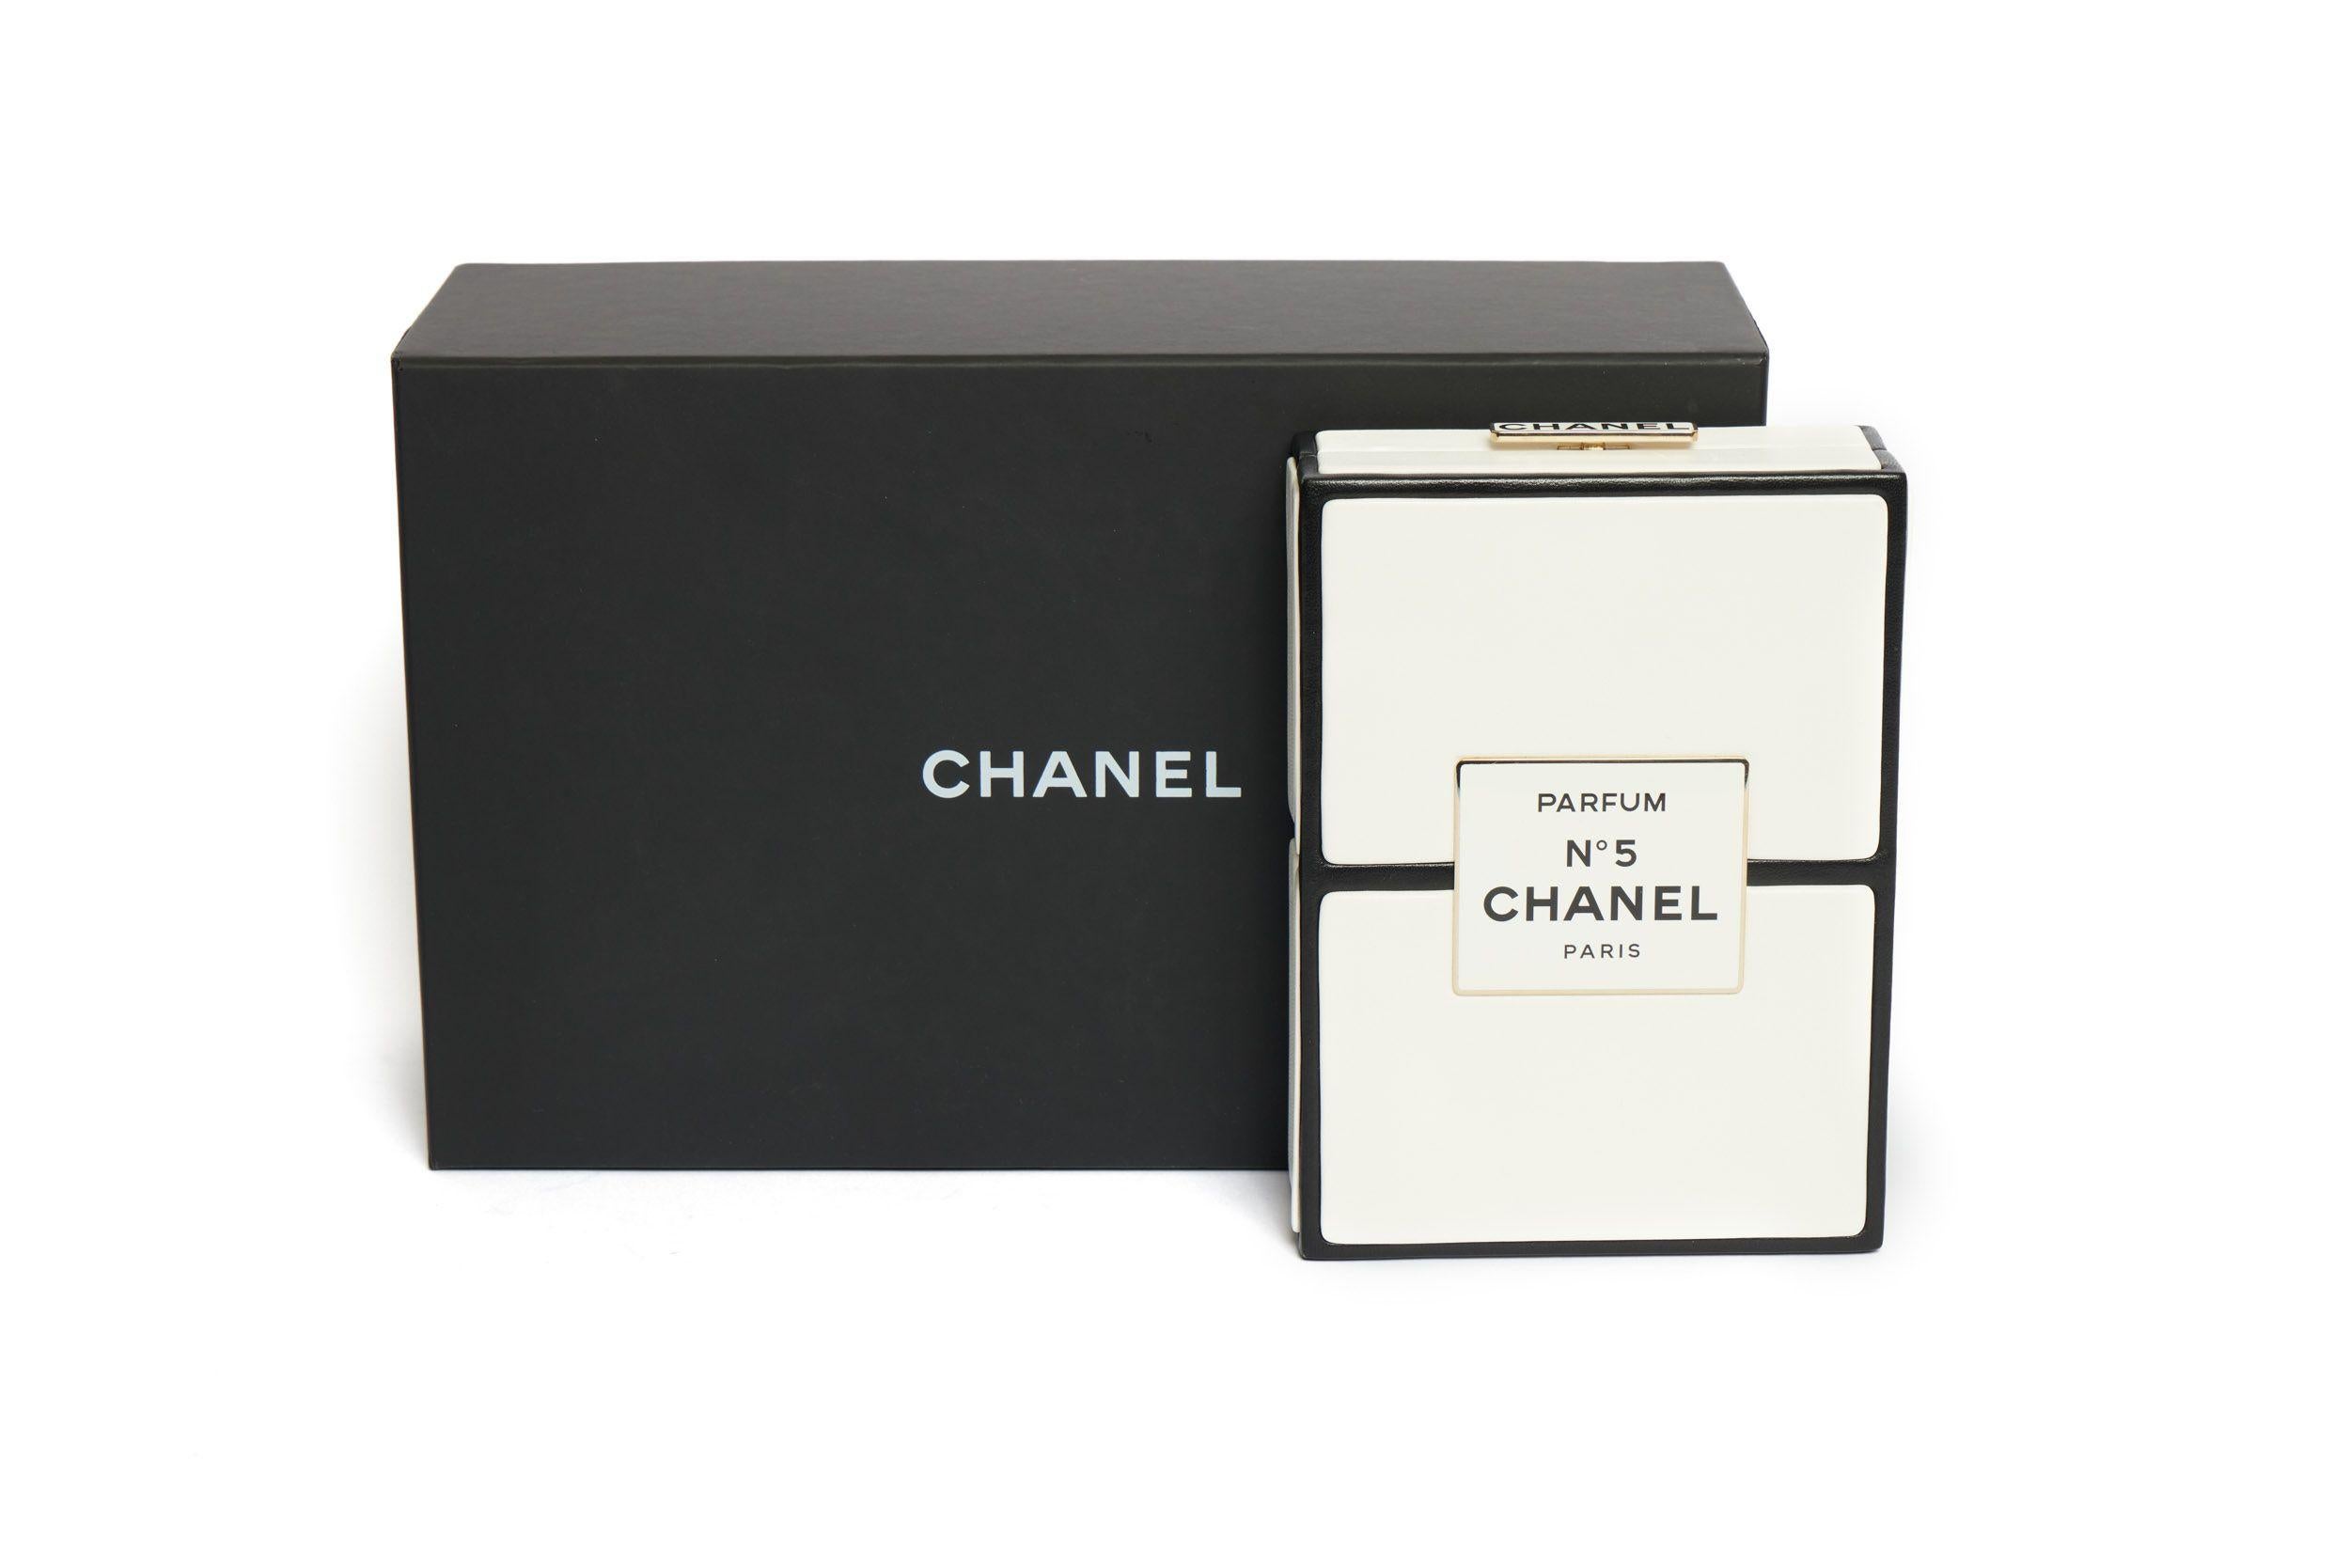 Chanel Parfum No5 evening clutch box from the Spring/Summer collection 2021. This shoulder bag is an absolute winner. The gold chain is 55' long but you can also wear it as a clutch. It is white and on the front of the bag is the classic emblem of